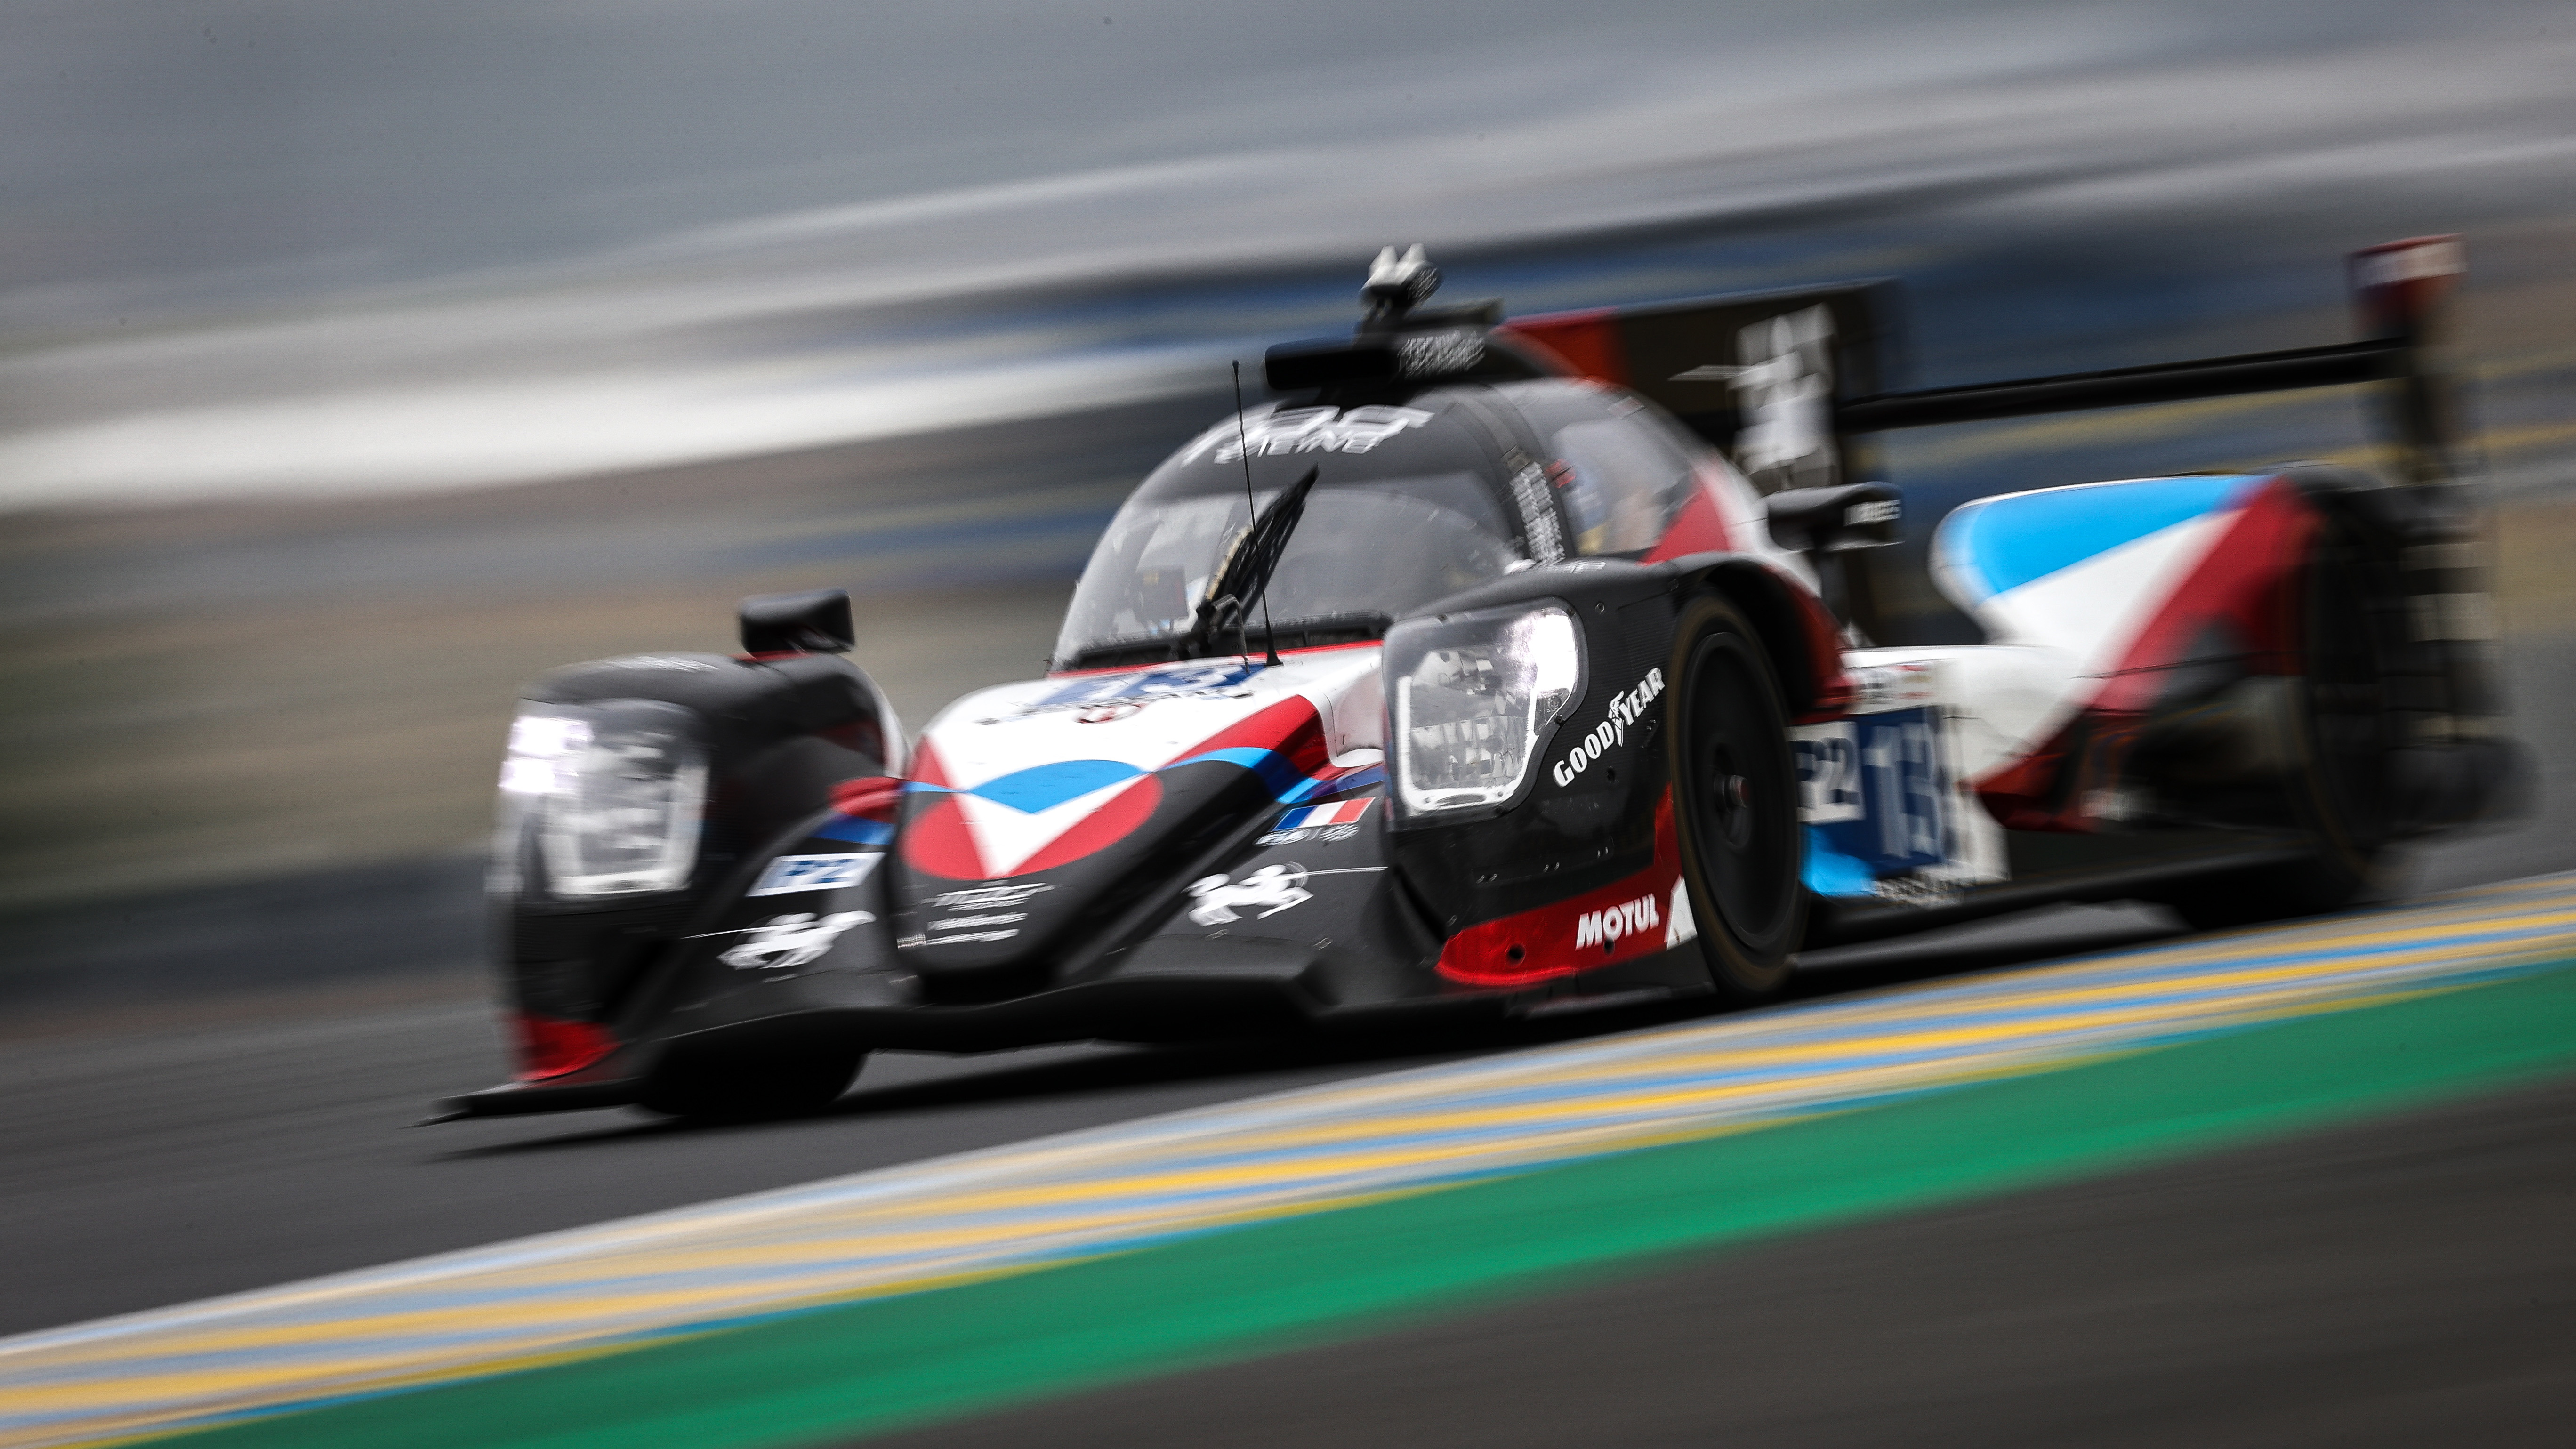 The #13 TDS Racing LMP2 of Philippe Cimadomo, Mathias Beche, and Tijmen van der Helm in action during testing for the Le Mans 24hr. Photo: James Moy/Getty Images